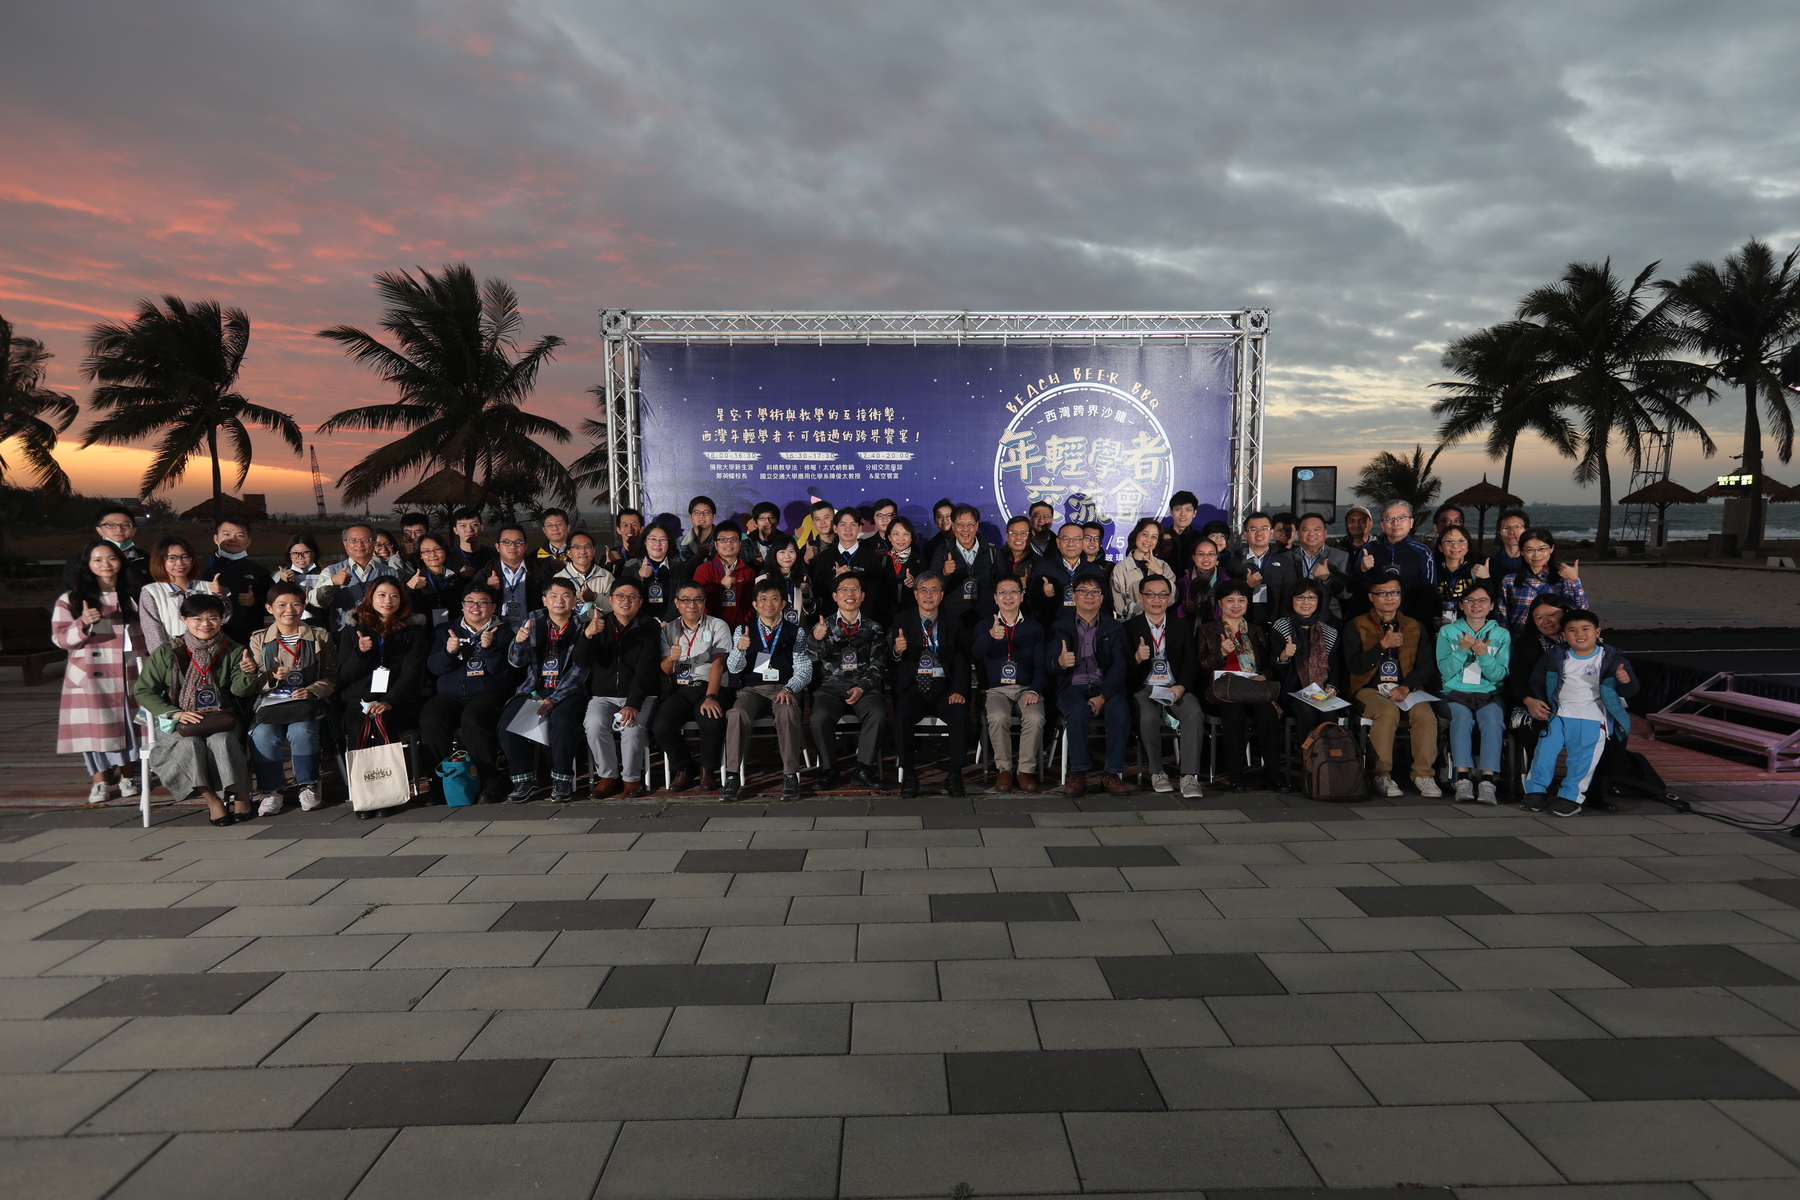 The participants of the Forum – accomplished teachers and researchers, new faculty members, PhD students and postdoctoral researchers, had a banquet under the starry sky.